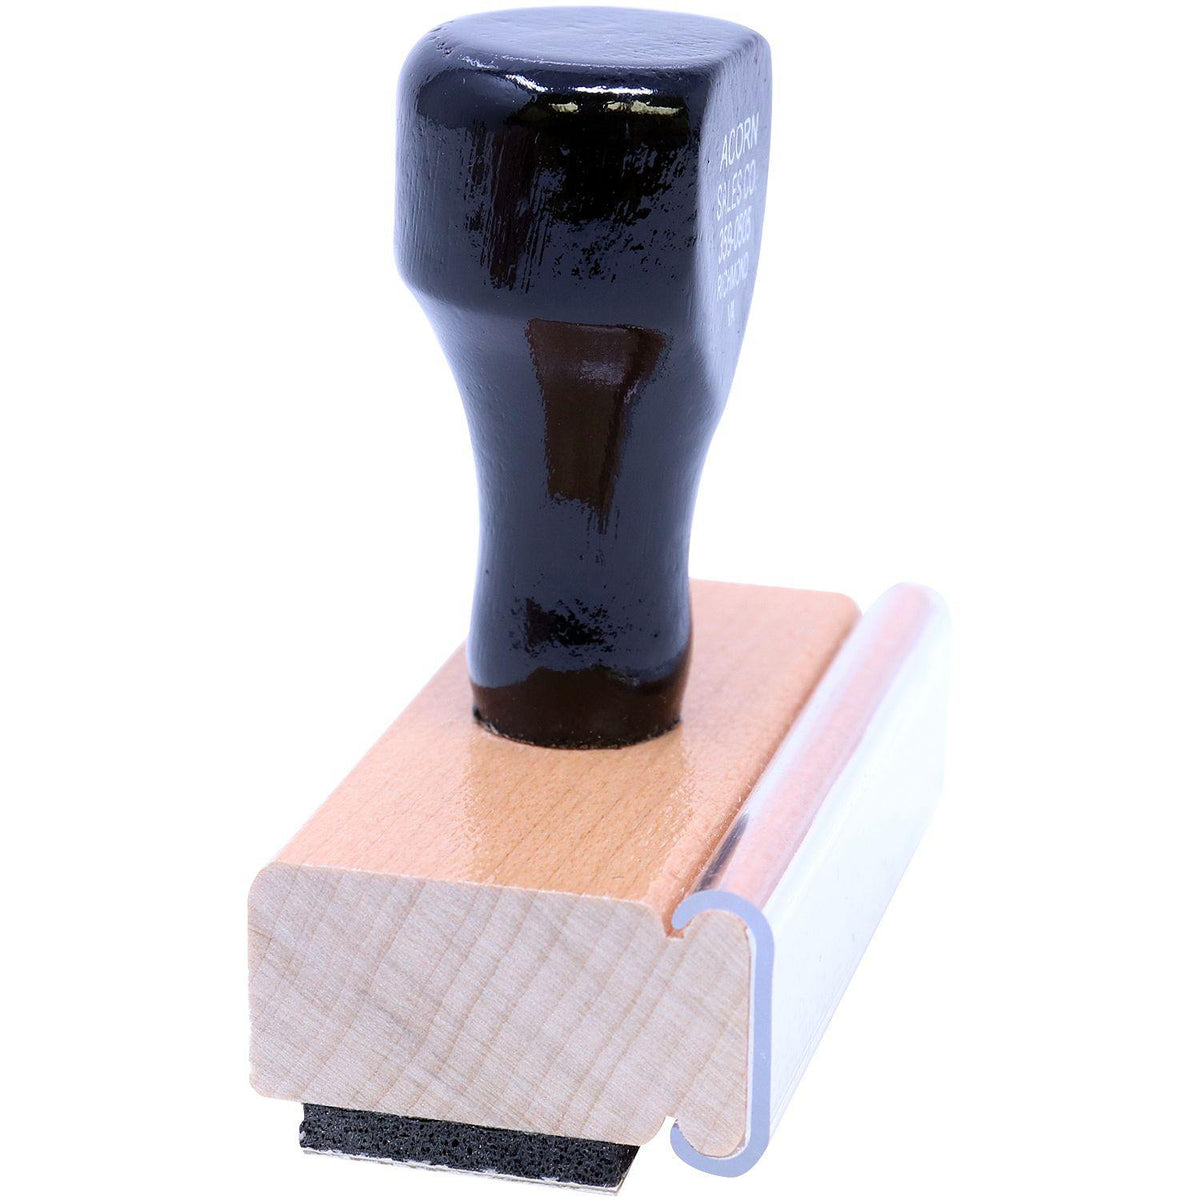 Side View of Bold FYI Rubber Stamp at an Angle